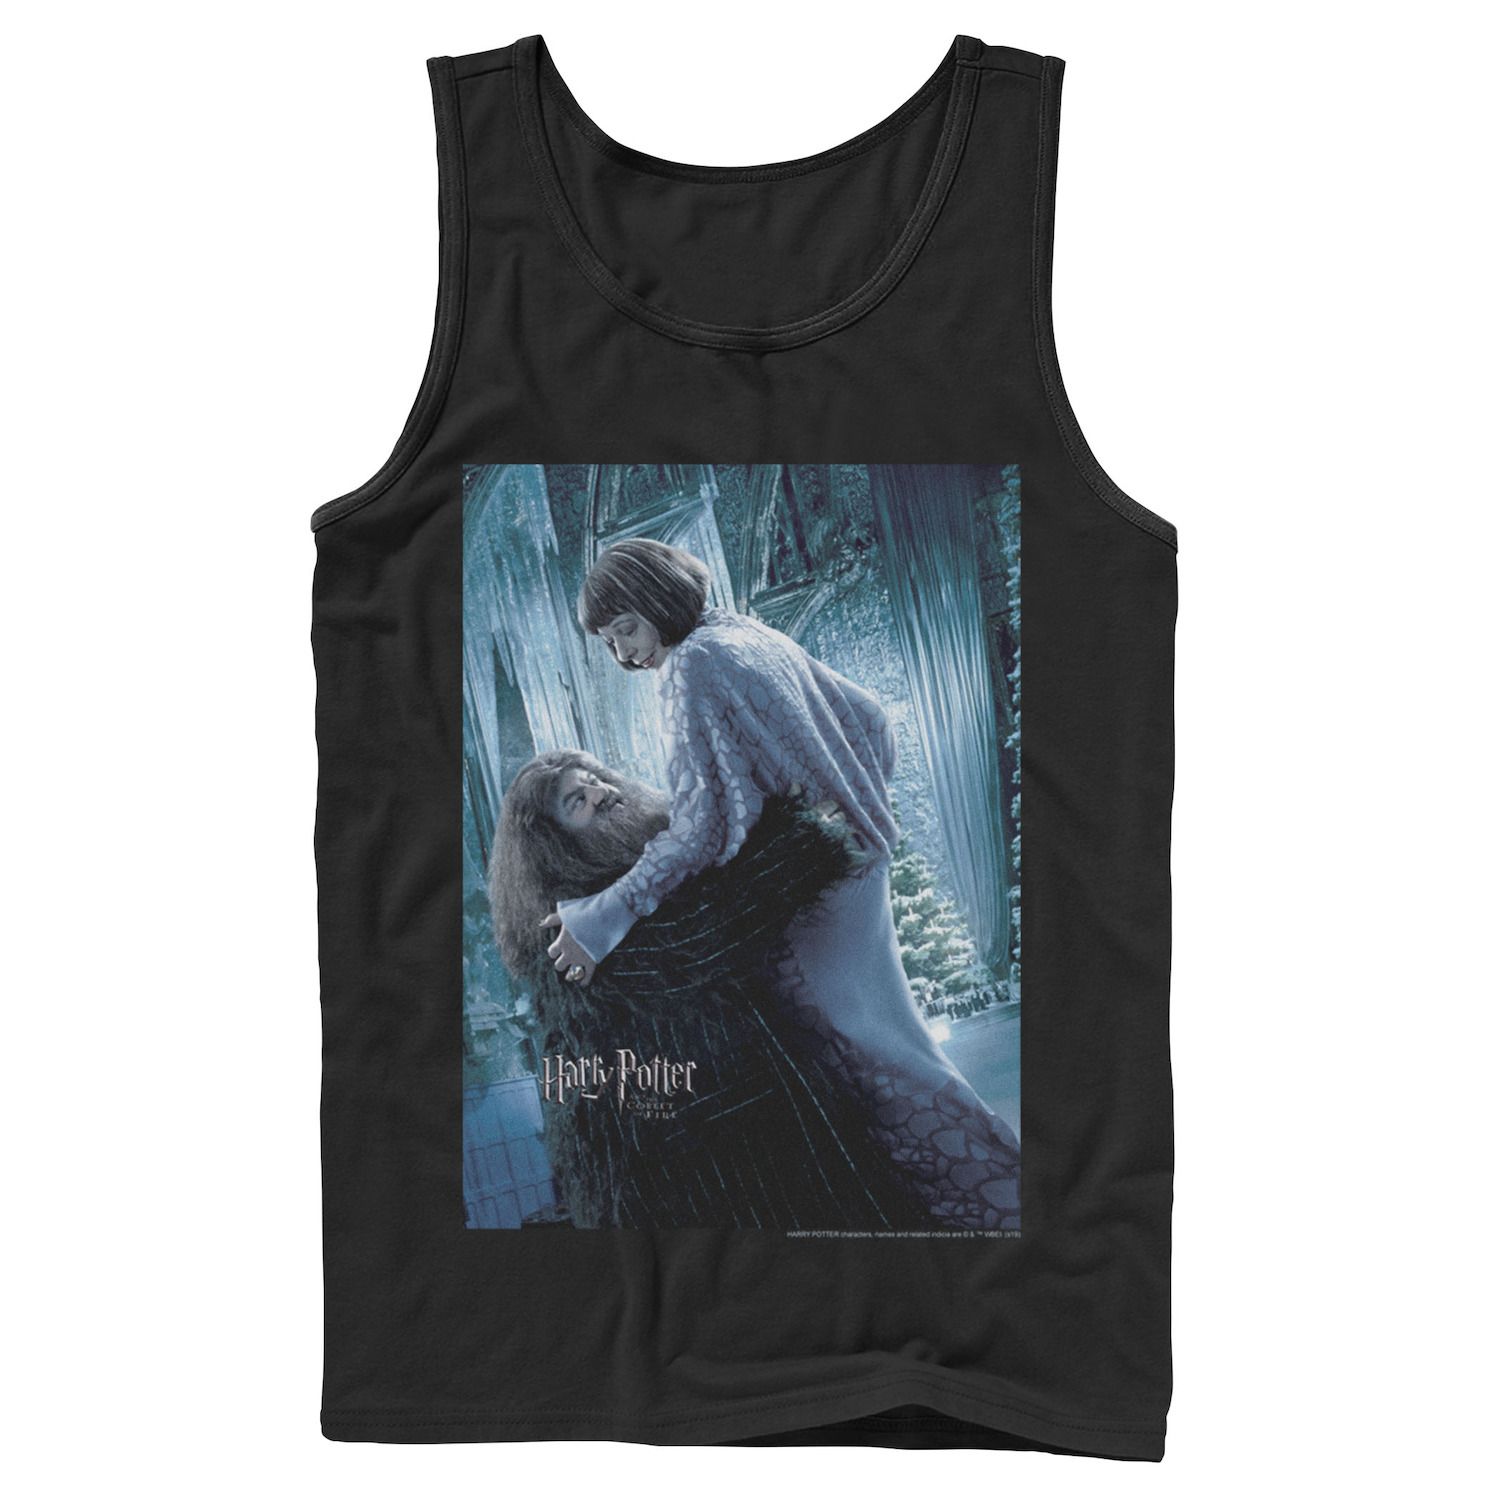 Image for Harry Potter Men's Hagrid And Madame Maxim Character Poster Graphic Tank Top at Kohl's.